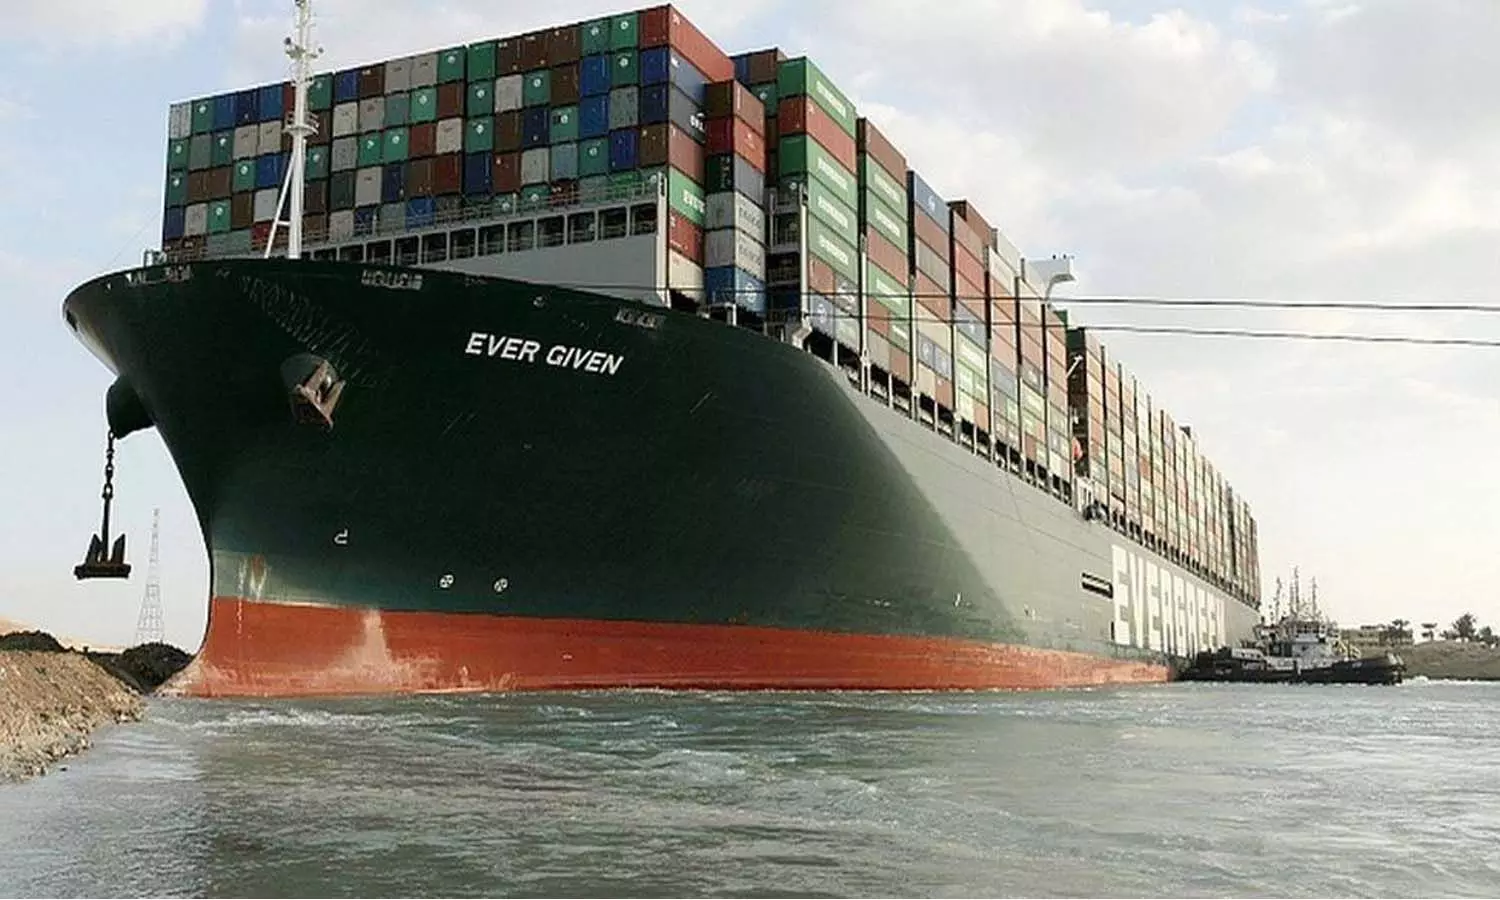 Canal service provider says container ship in Suez set free